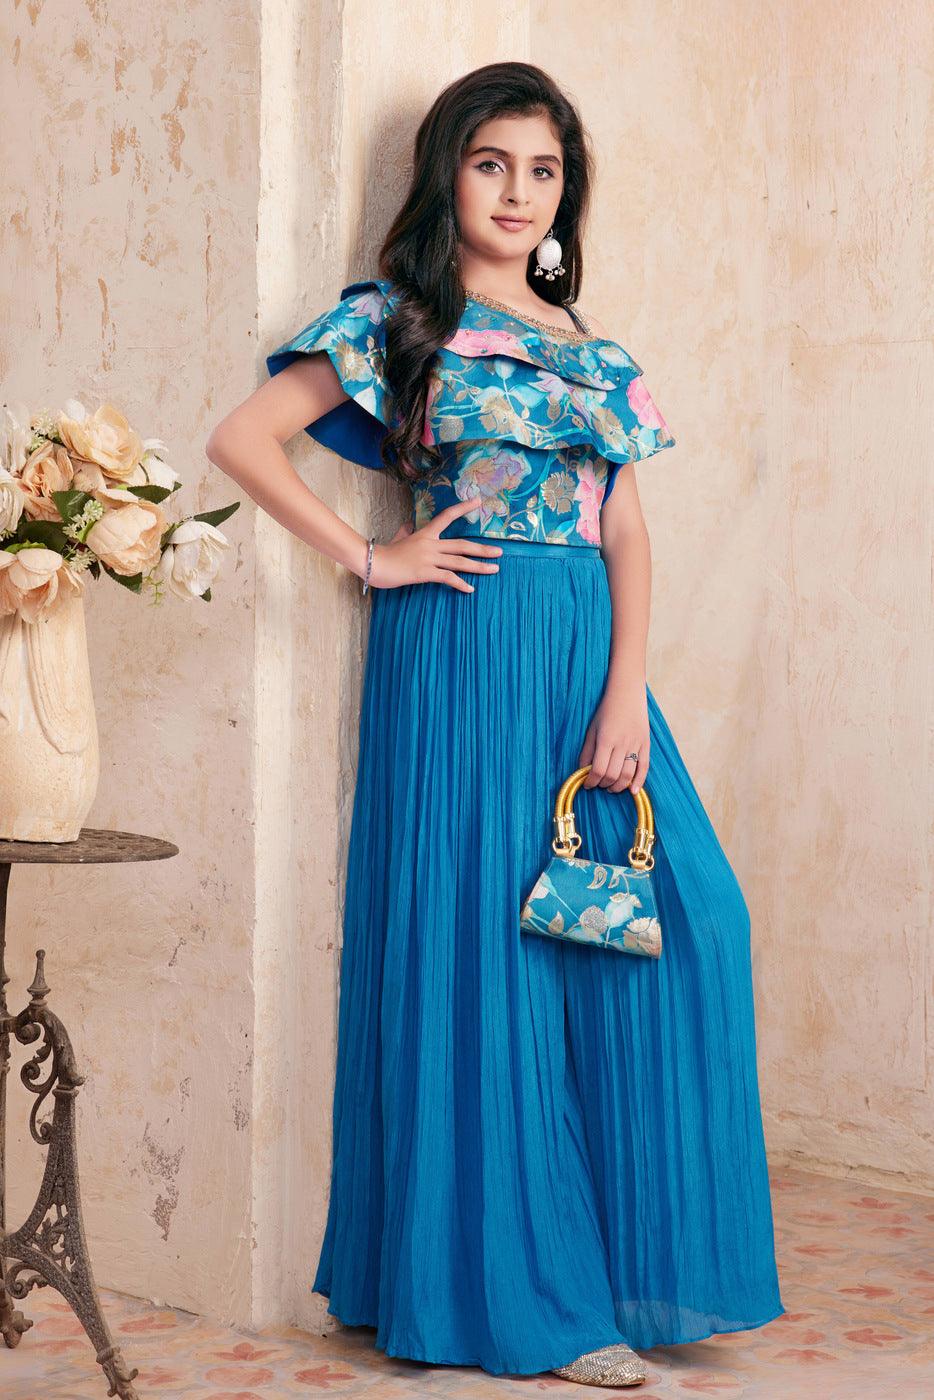 Buy Indo Western Dress for Women Online in India at Mehar